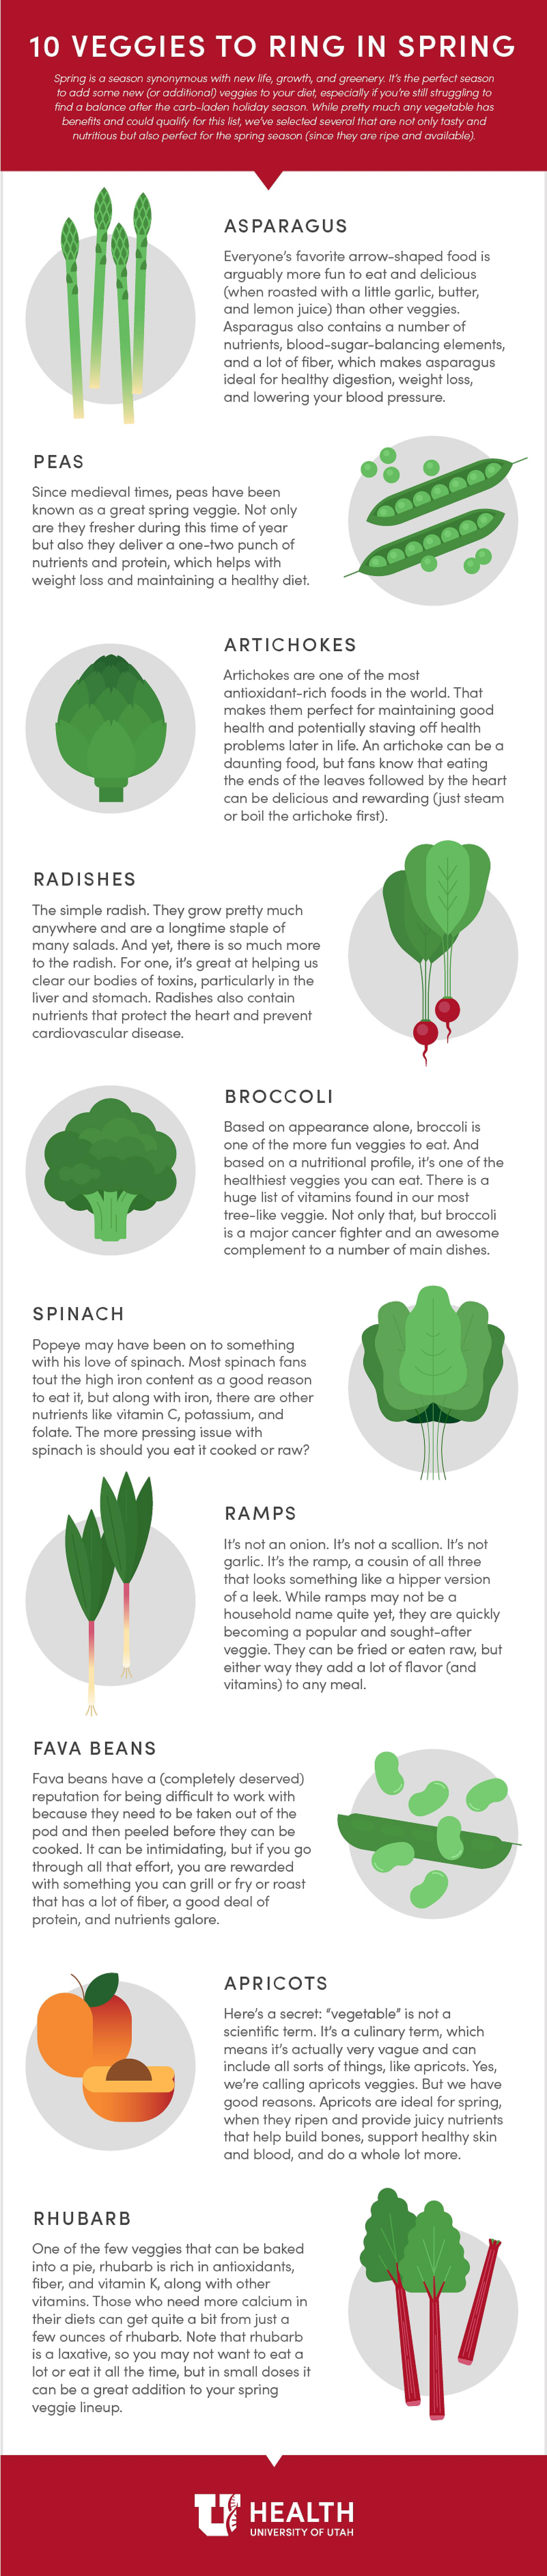 Vegetables infographic